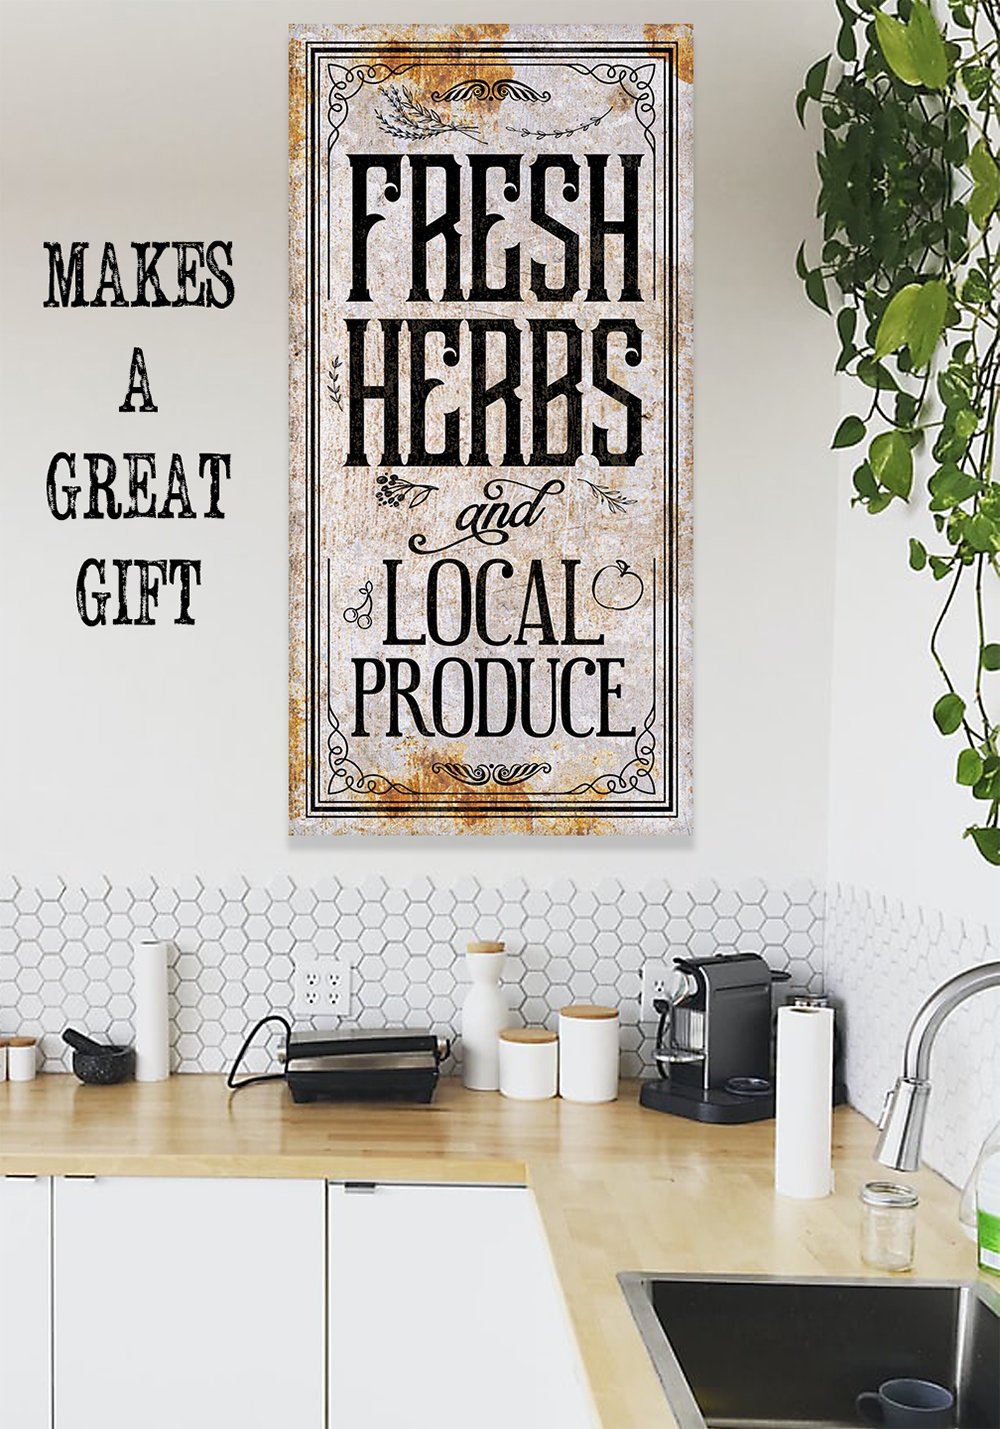 Fresh Herbs and Local Produce - Canvas | Lone Star Art.